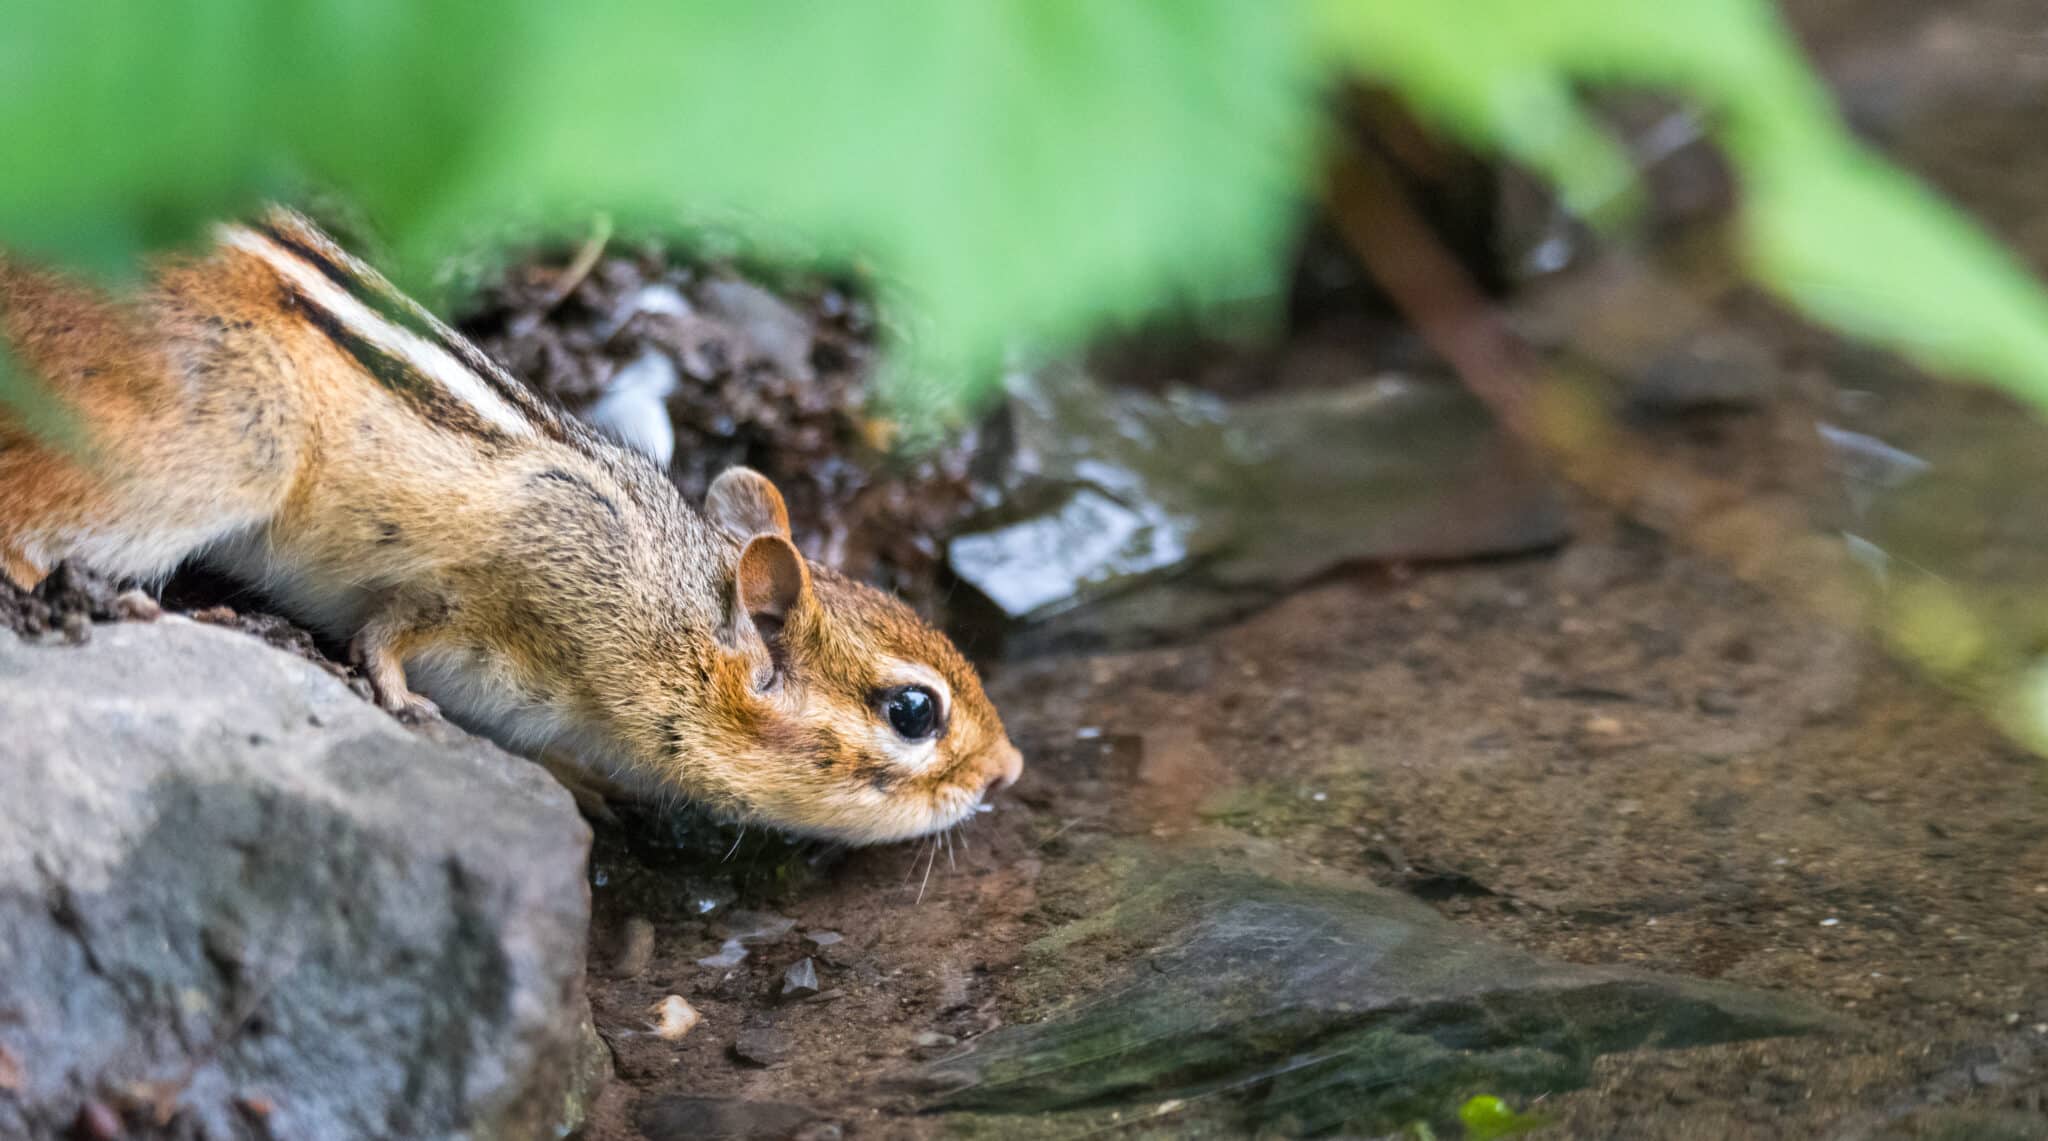 Eastern Chipmunk drinking from a creek in the forest.